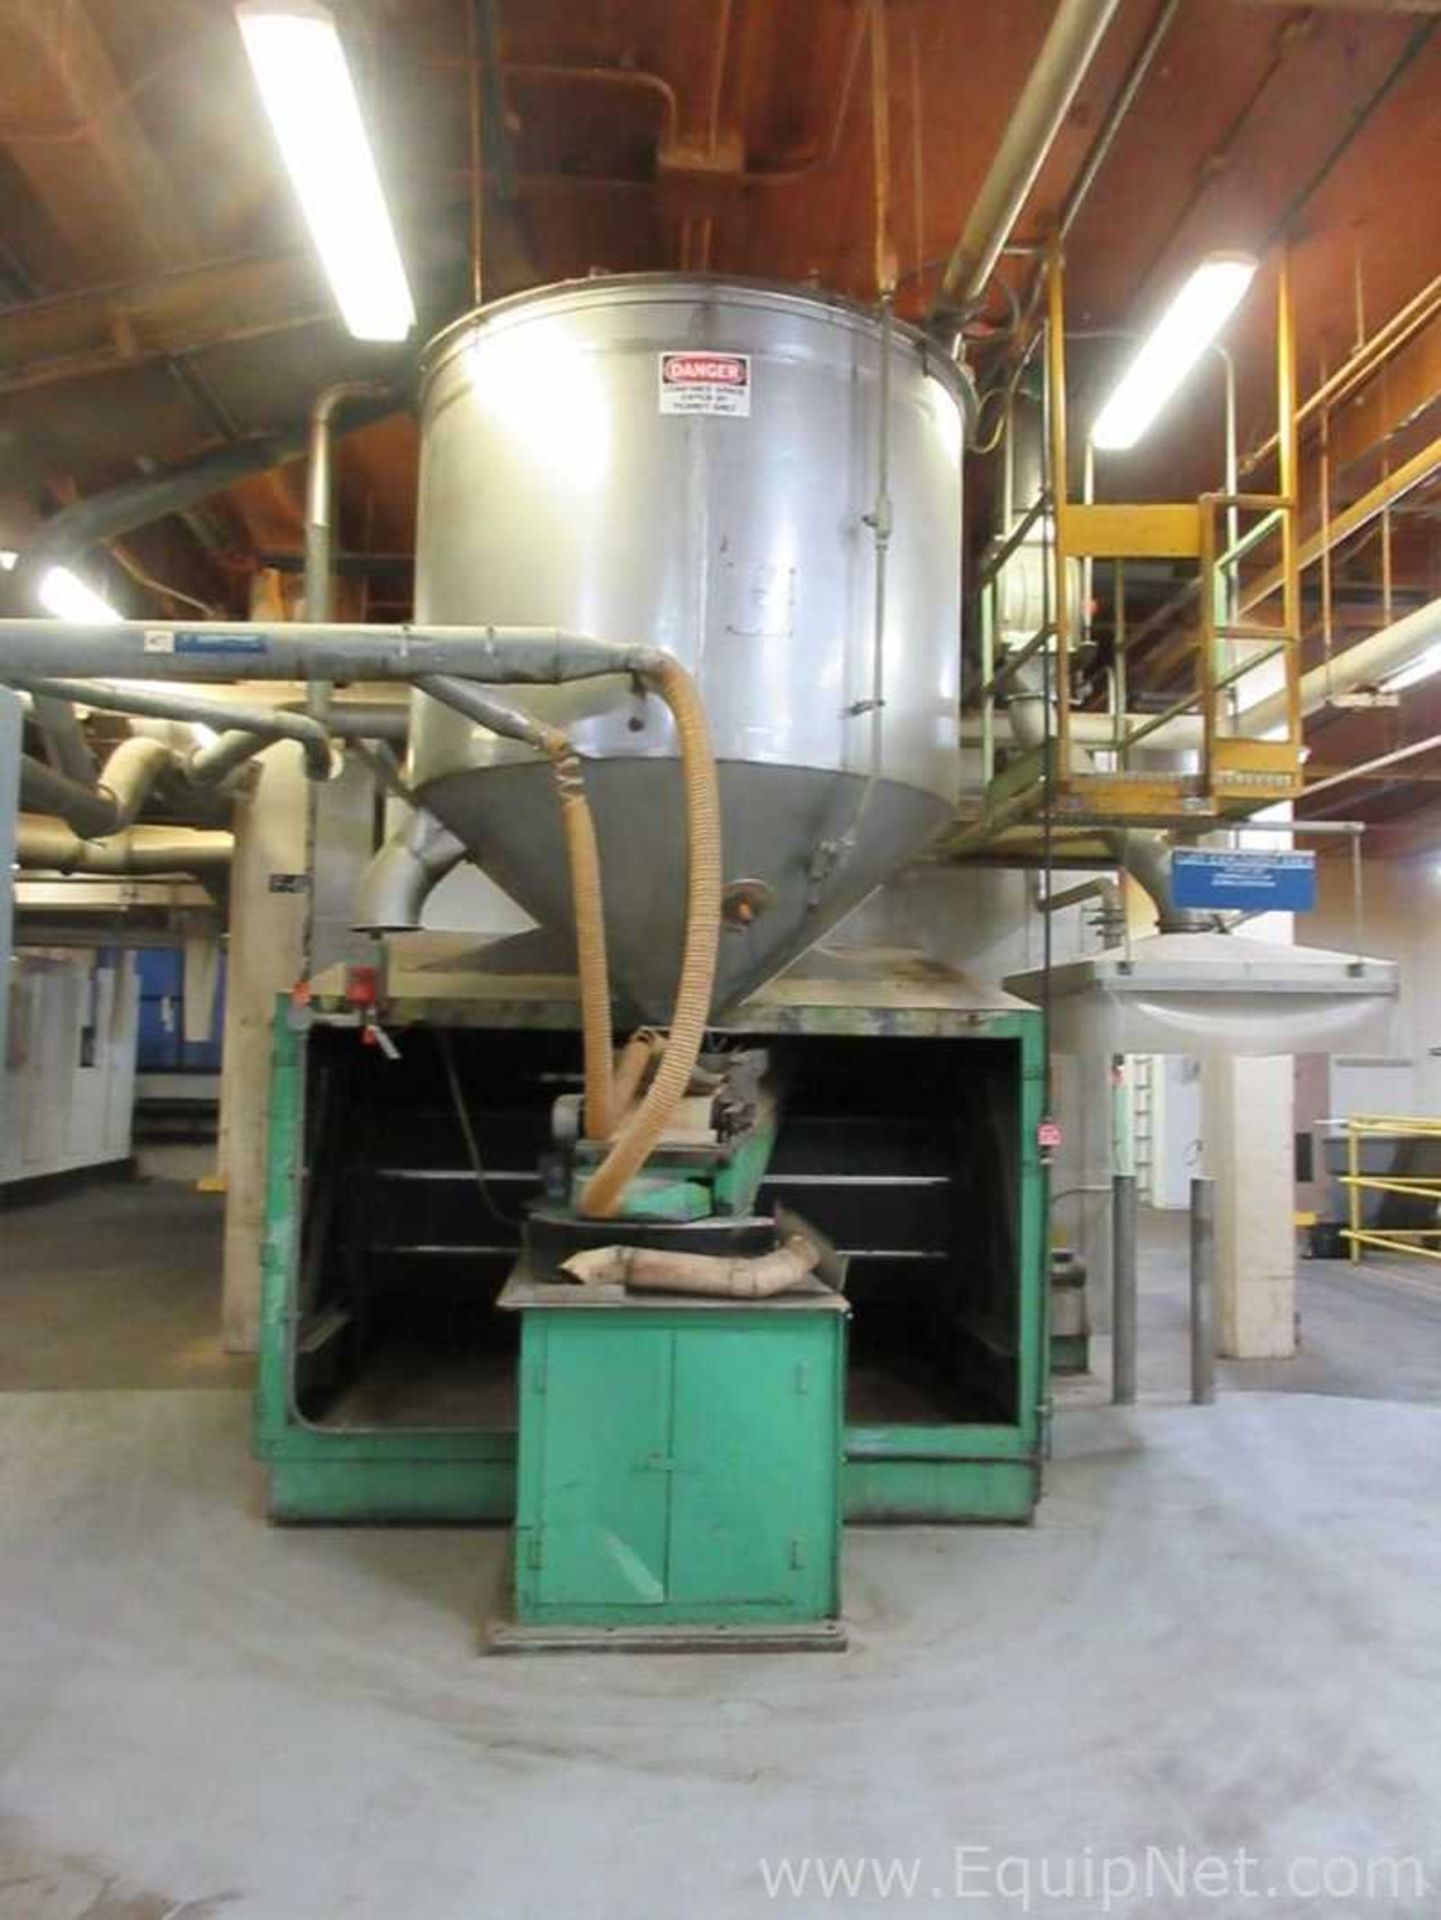 EQUIPNET LISTING #597061; REMOVAL COST: $0; DESCRIPTION: National Drying Machinery Belt - Image 22 of 27